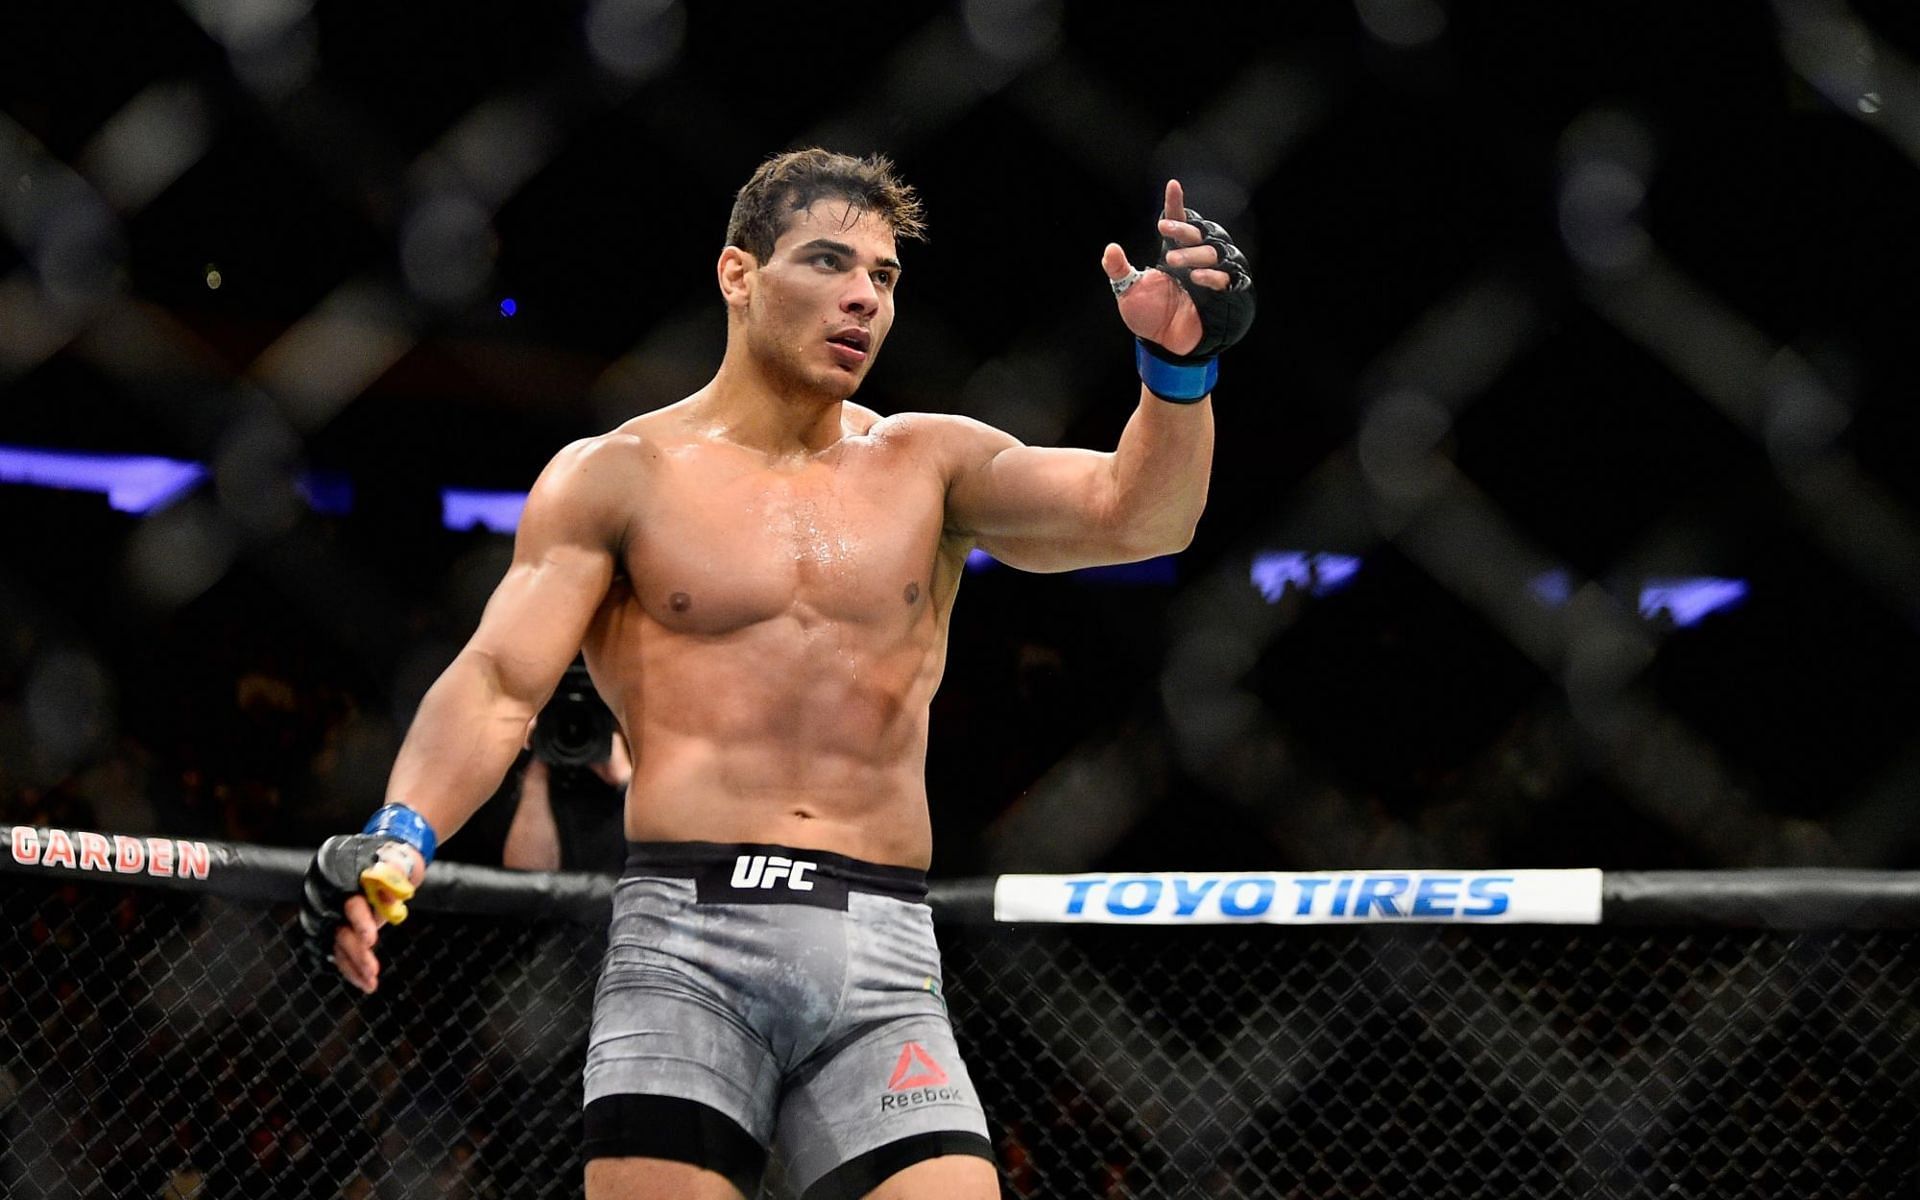 Does Paulo Costa deserve more respect than he gets from UFC fans?